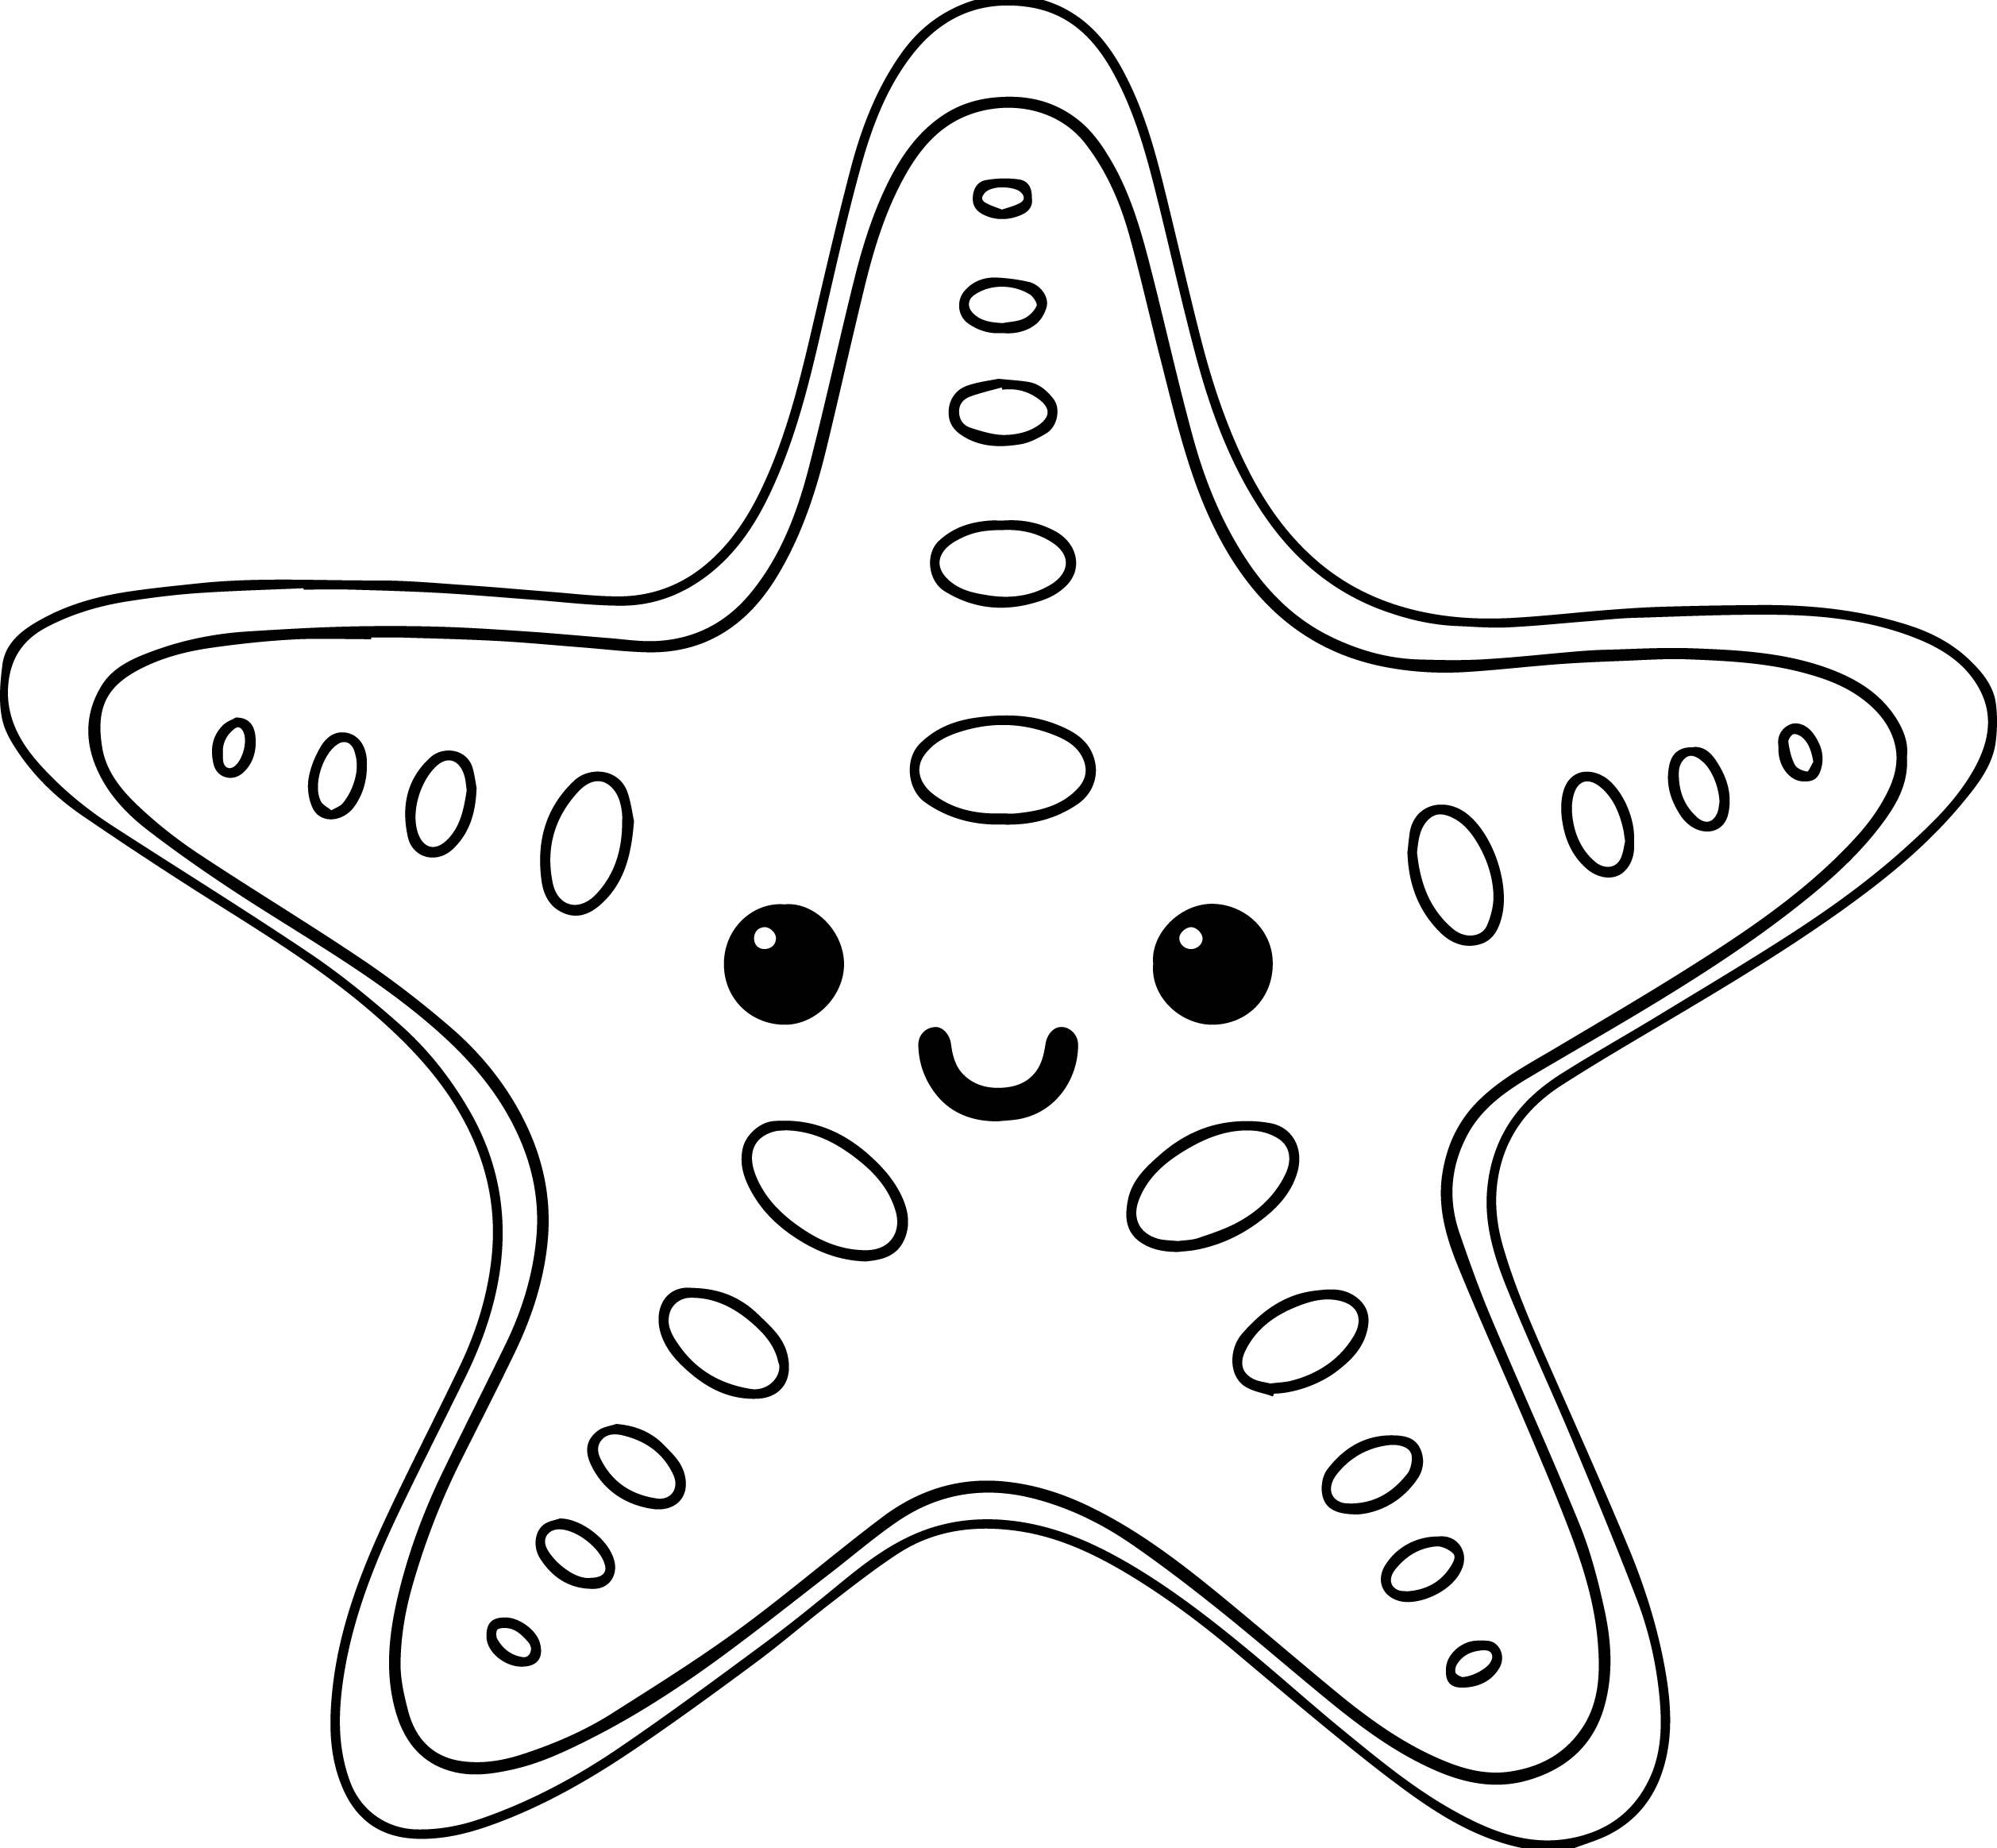 starfish to color starfish coloring pages free printables momjunction starfish to color 